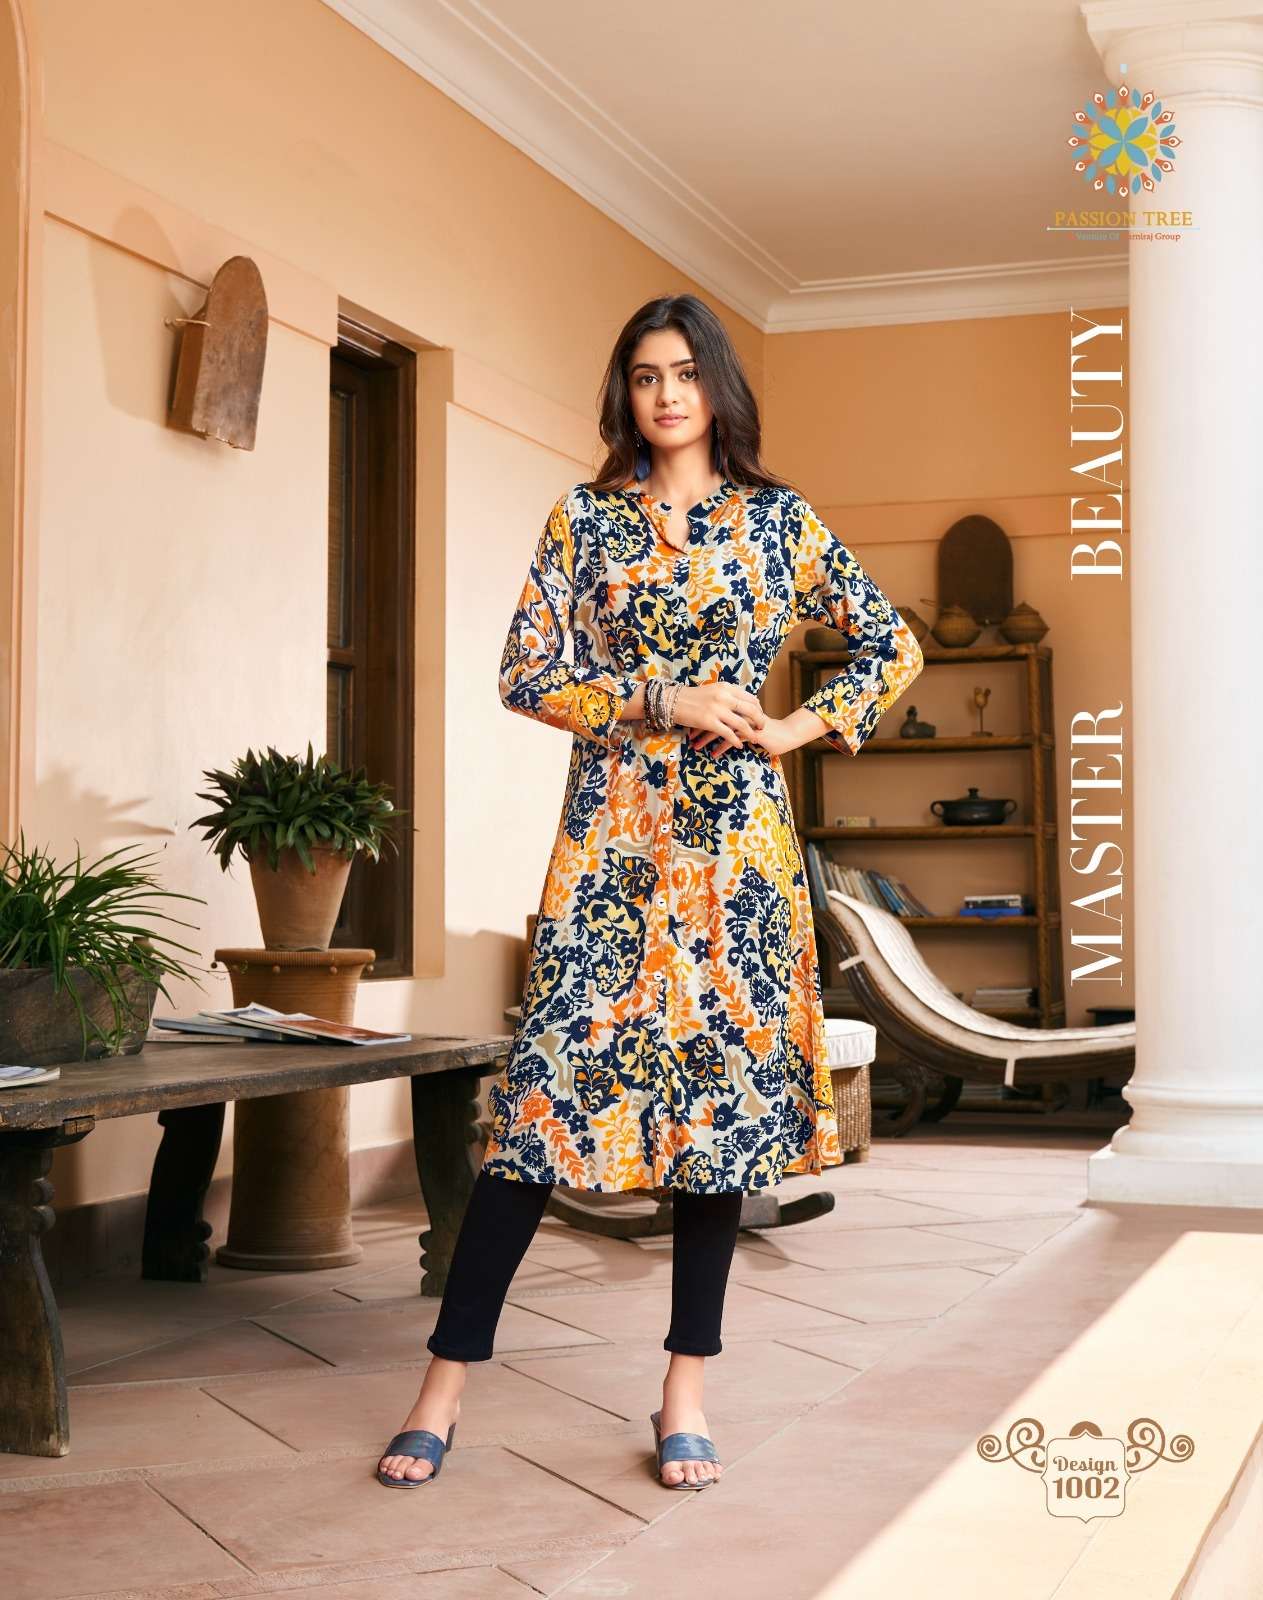 PK Liva vol 3 casual Wear Printed Kurti Collection, this catalog fabric is  rayon,